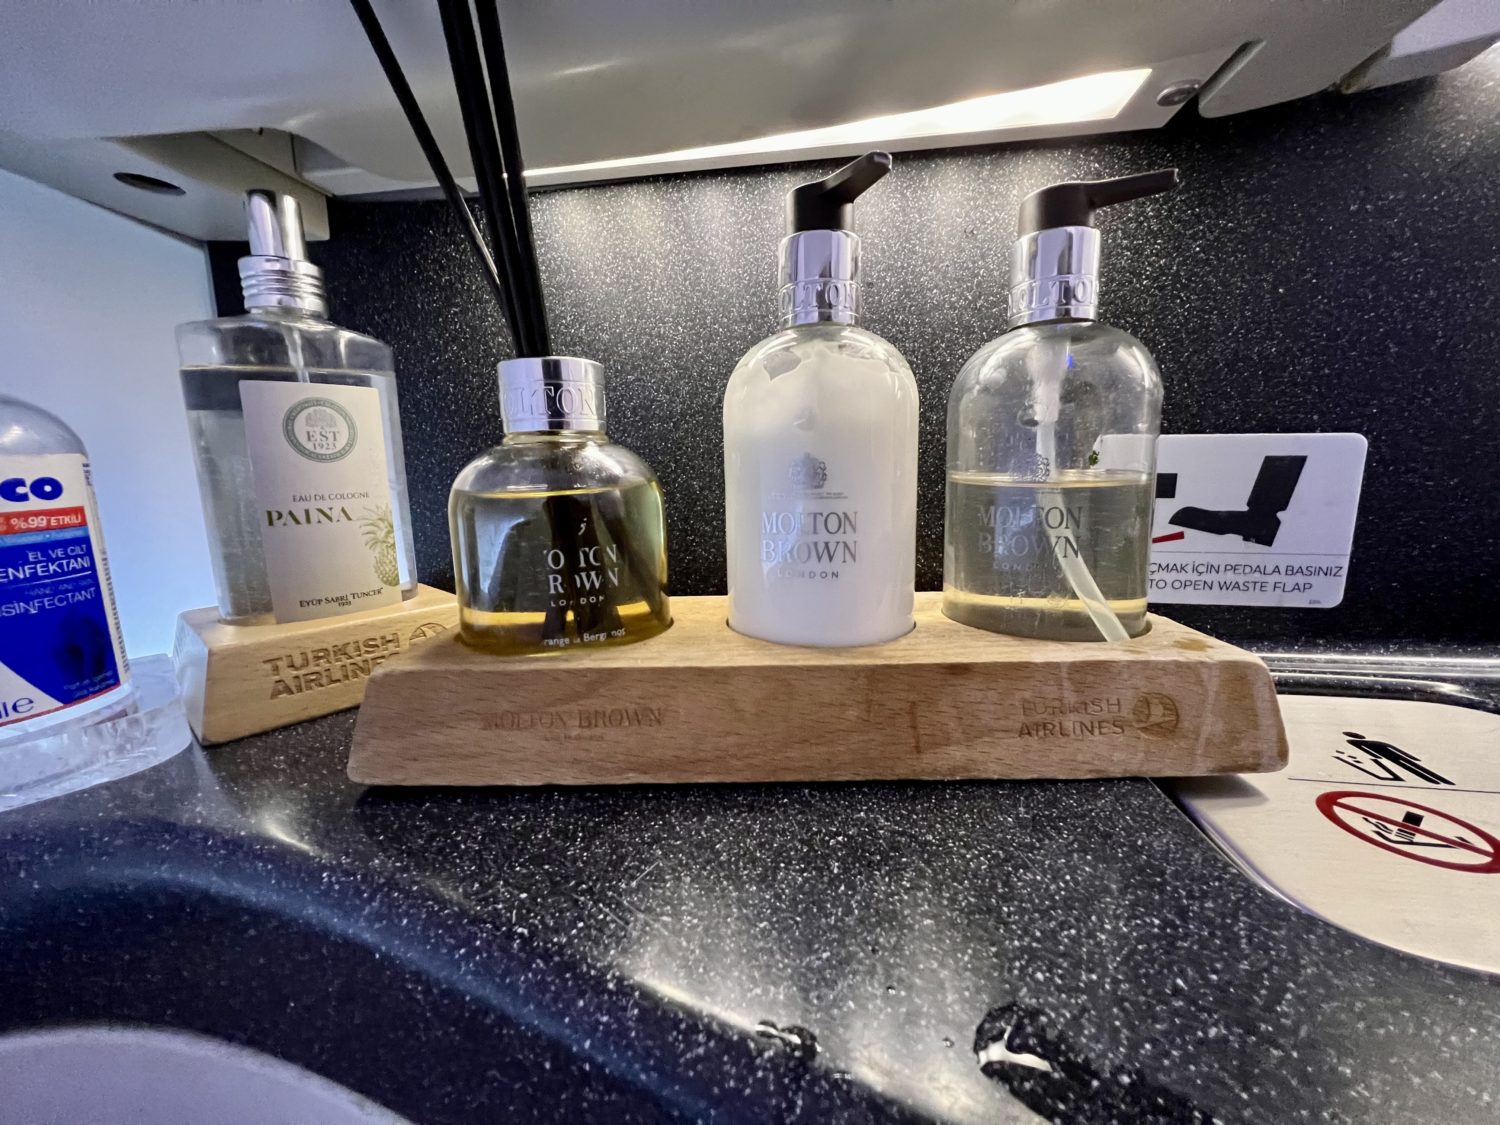 turkish airlines business class amenities in the lavatory